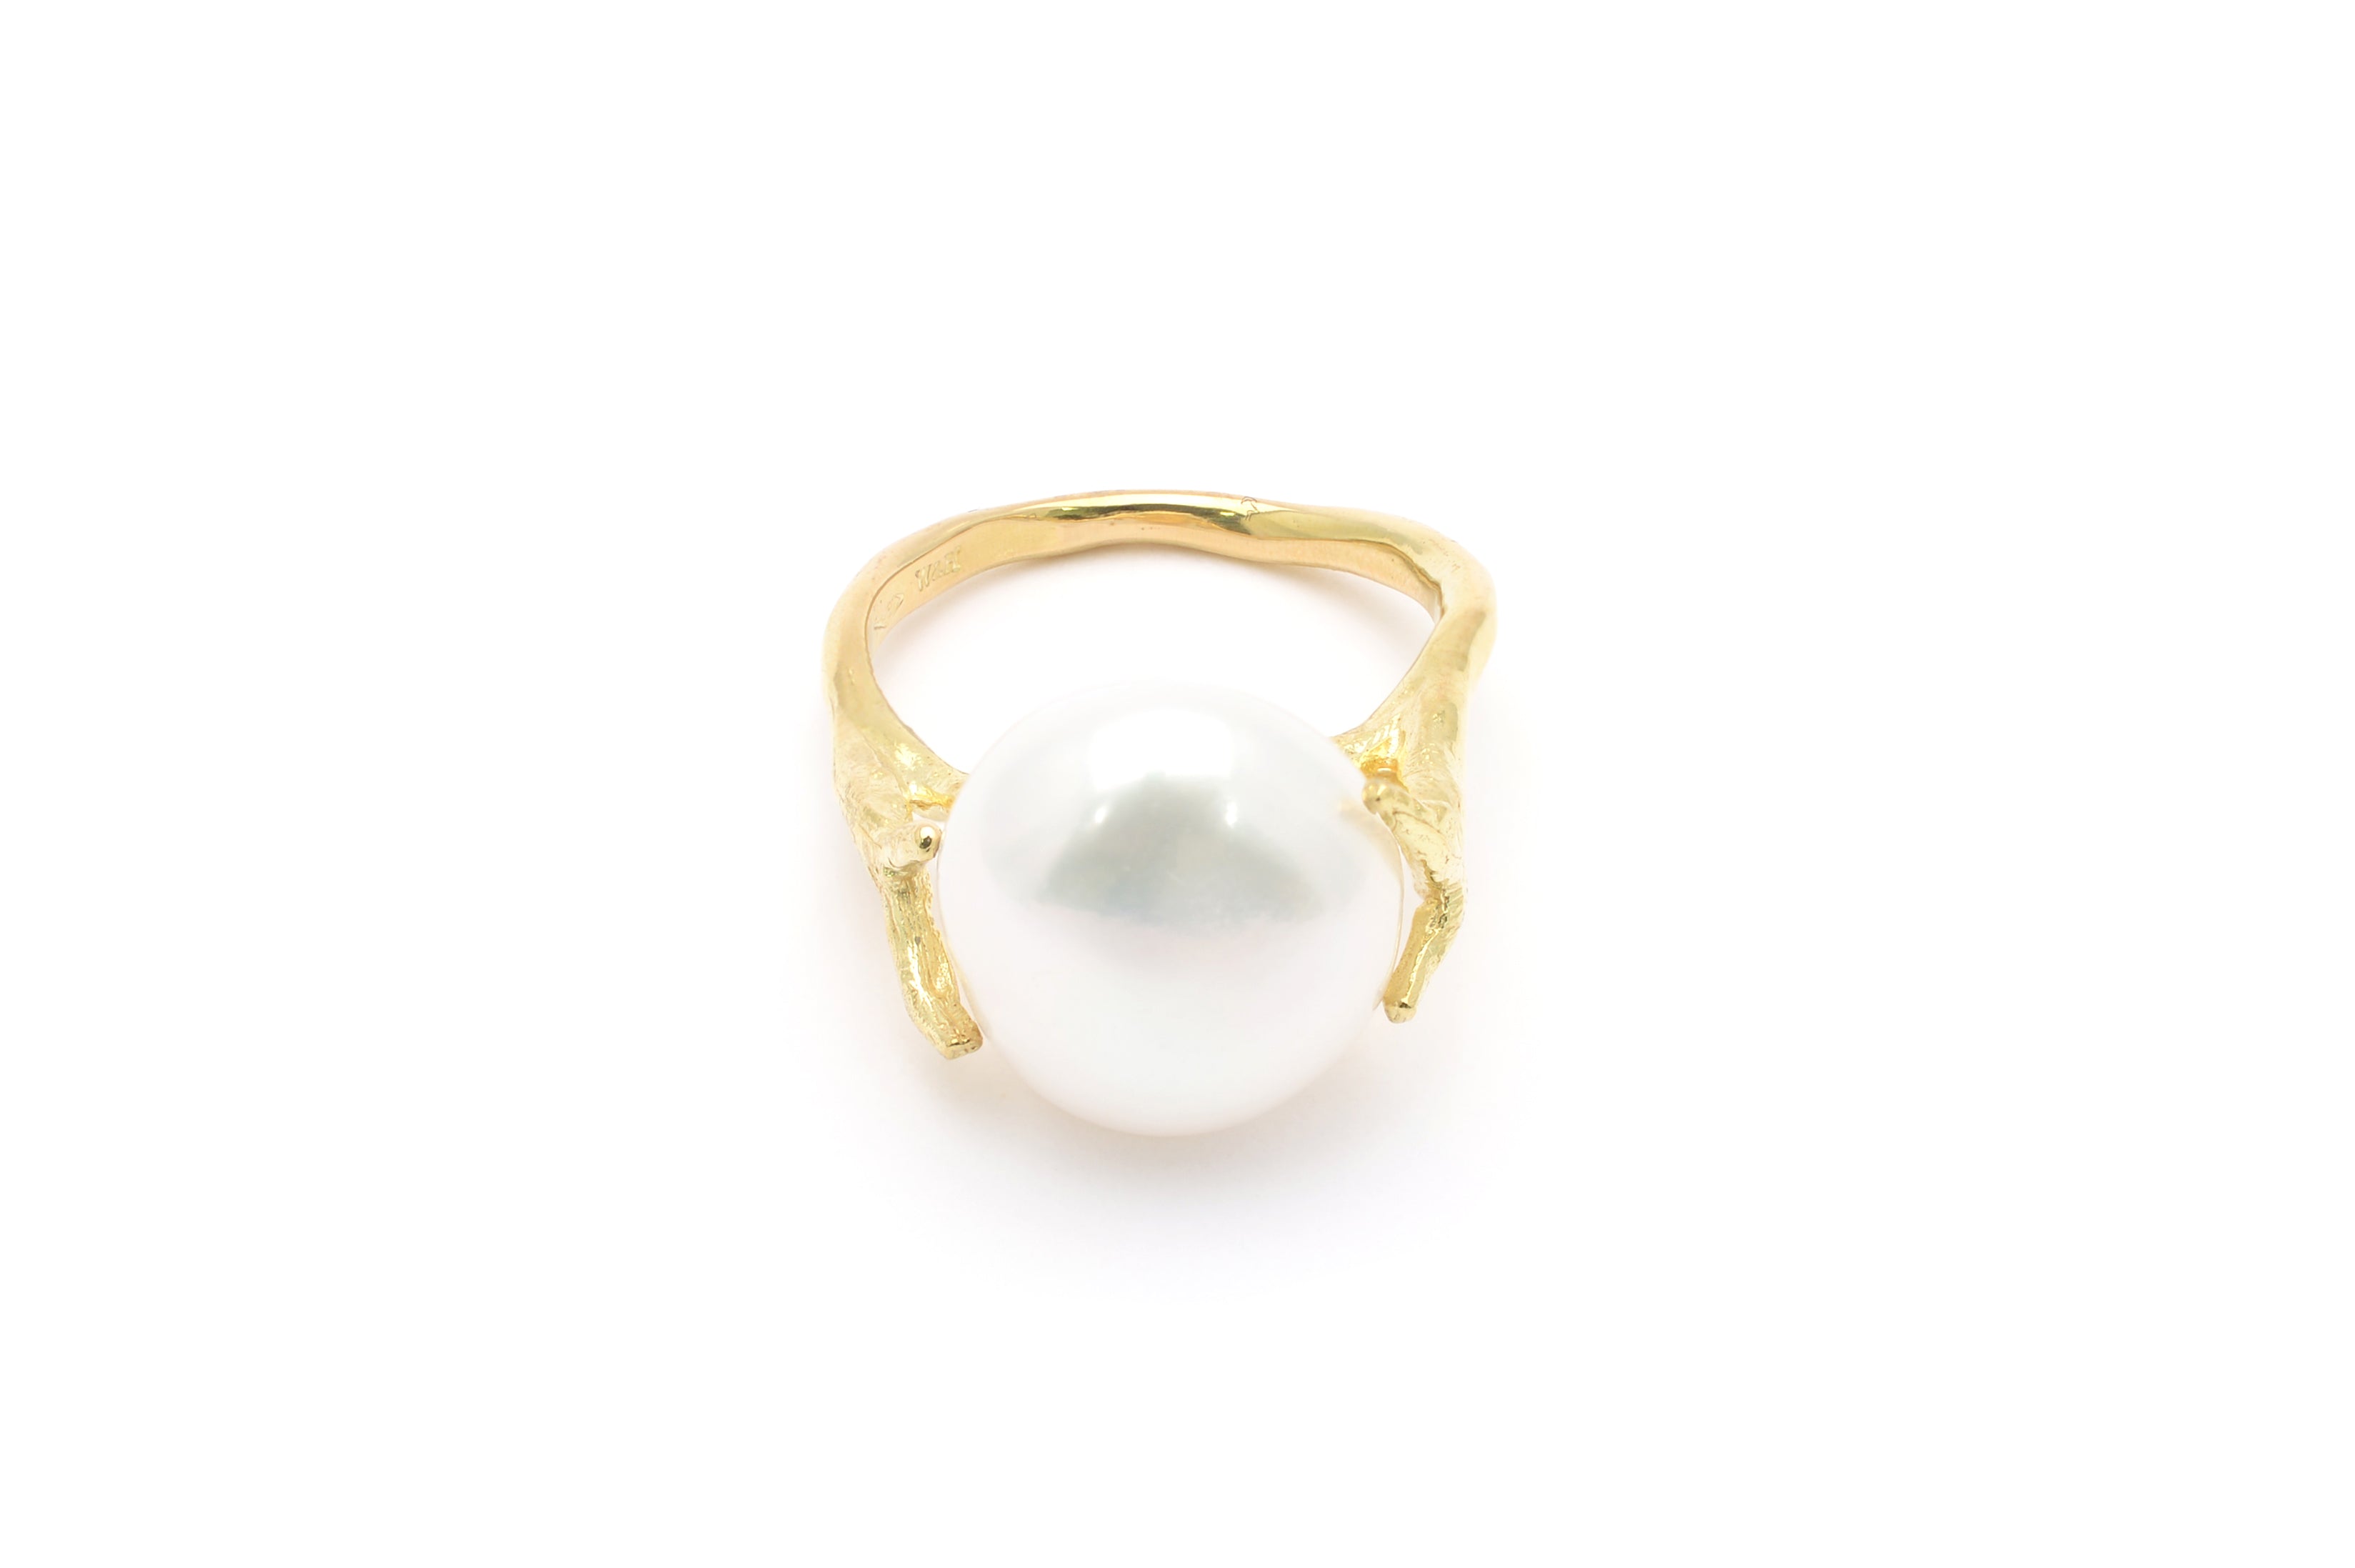 18kt Gold Statement Ring With Freshwater Pearl